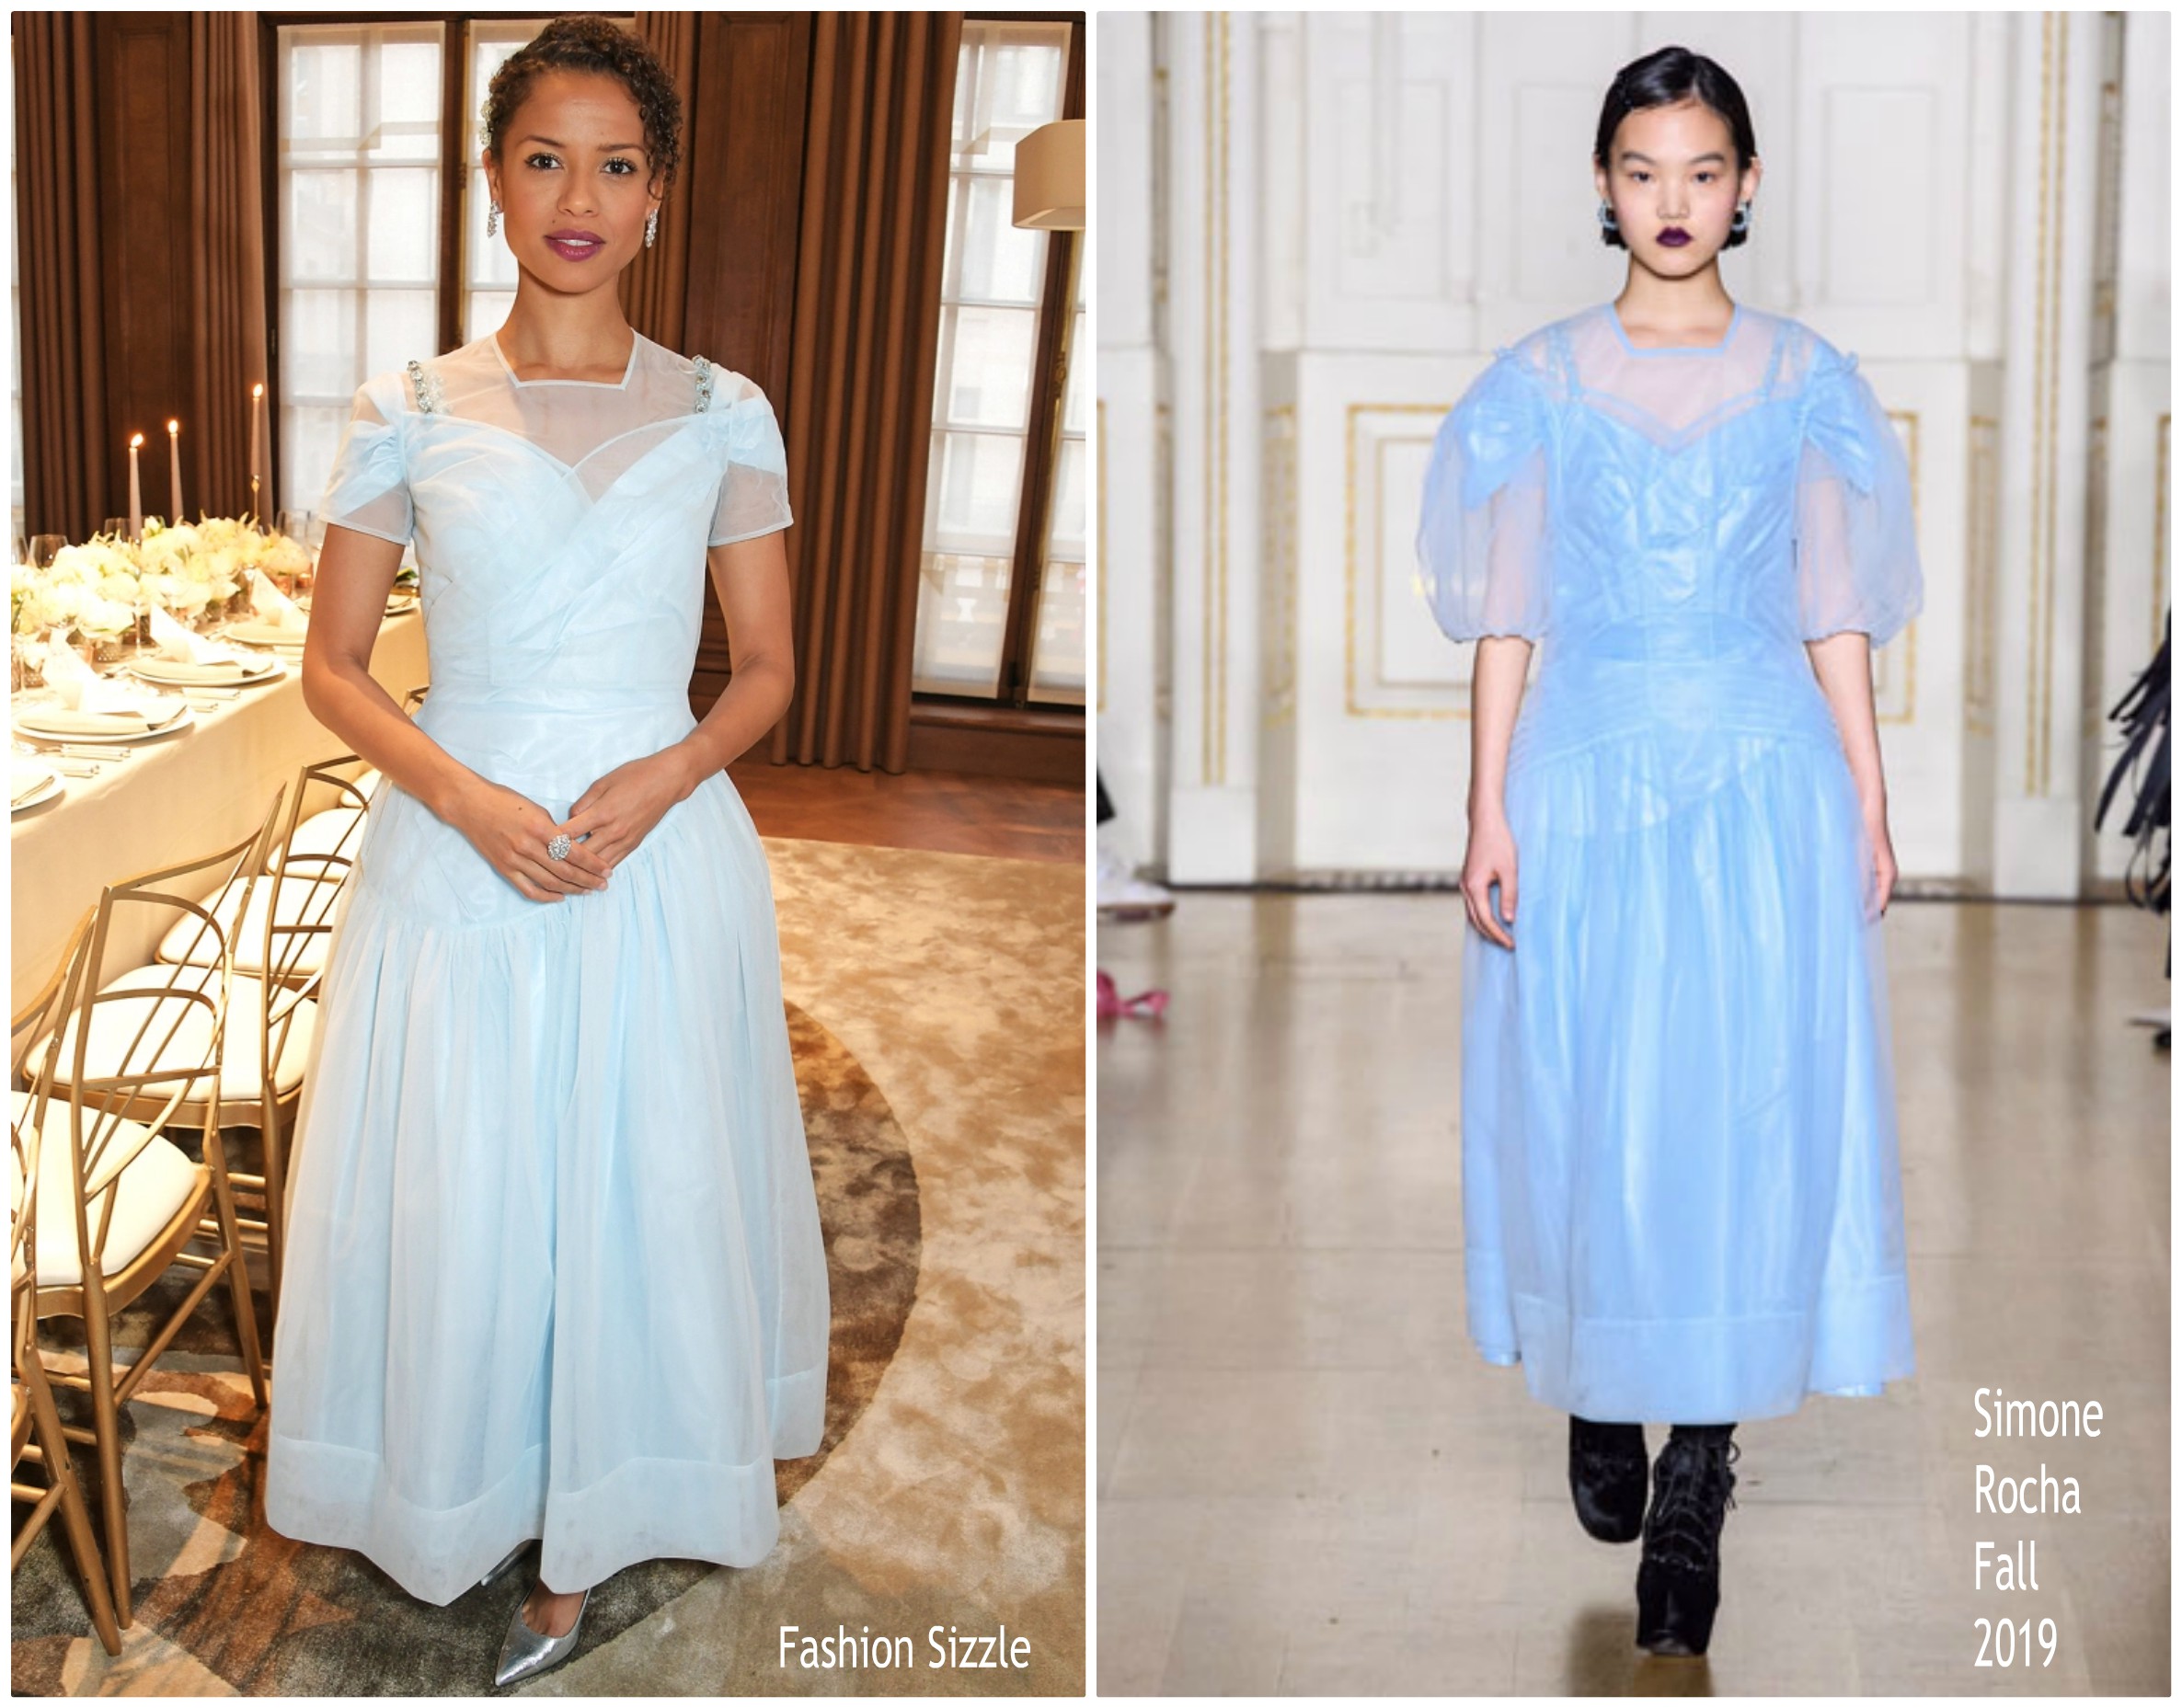 Gugu Mbatha-Raw  In Simone Rocha  @ Cartier And British Vogue Darlings Dinner